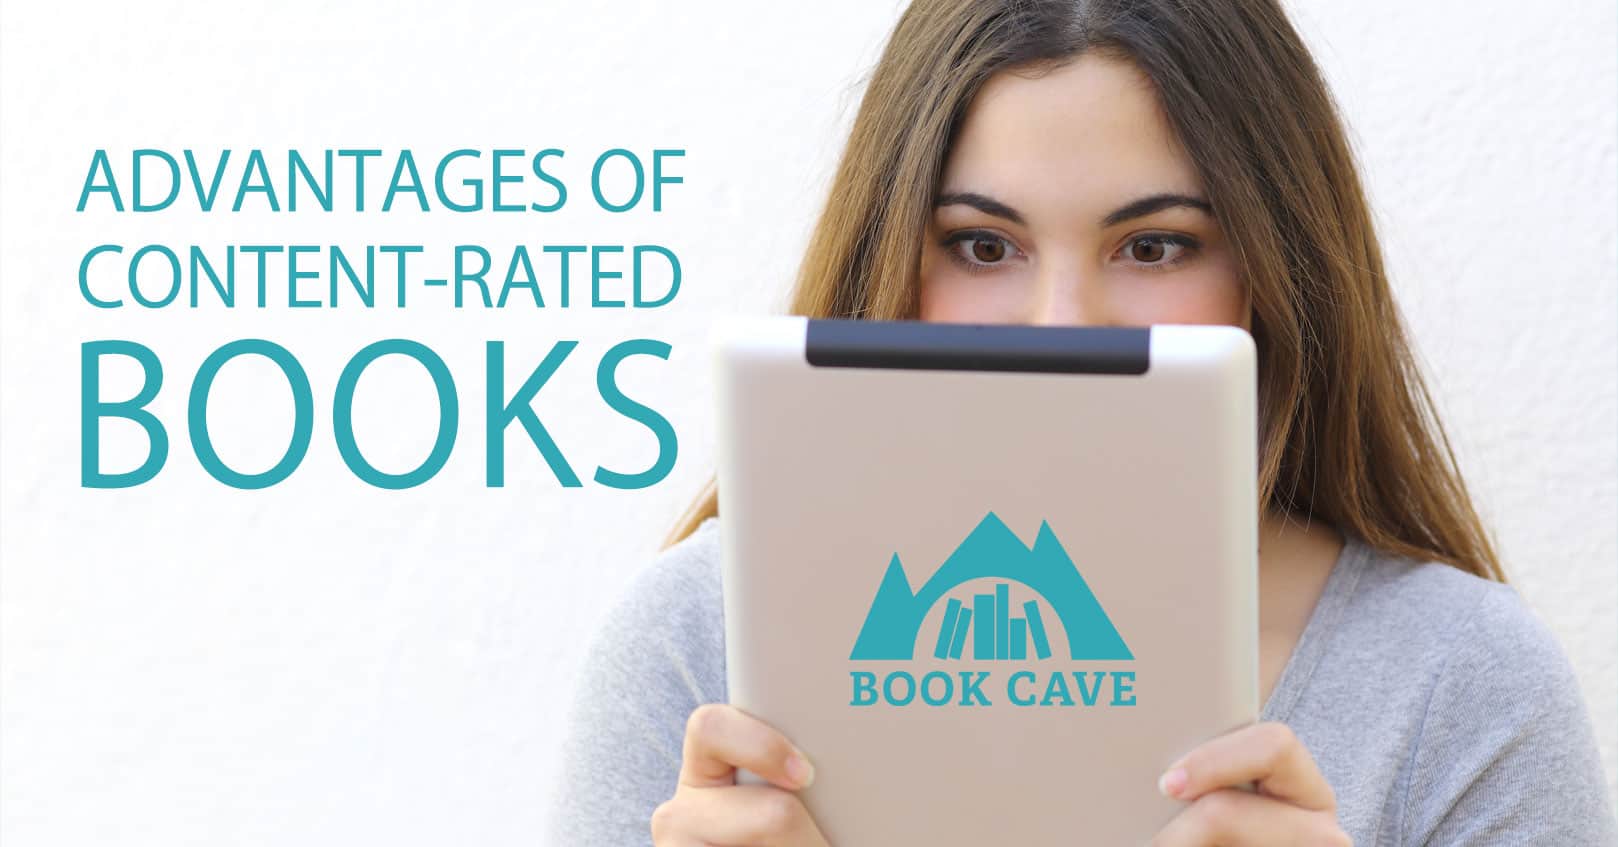 Why rated books